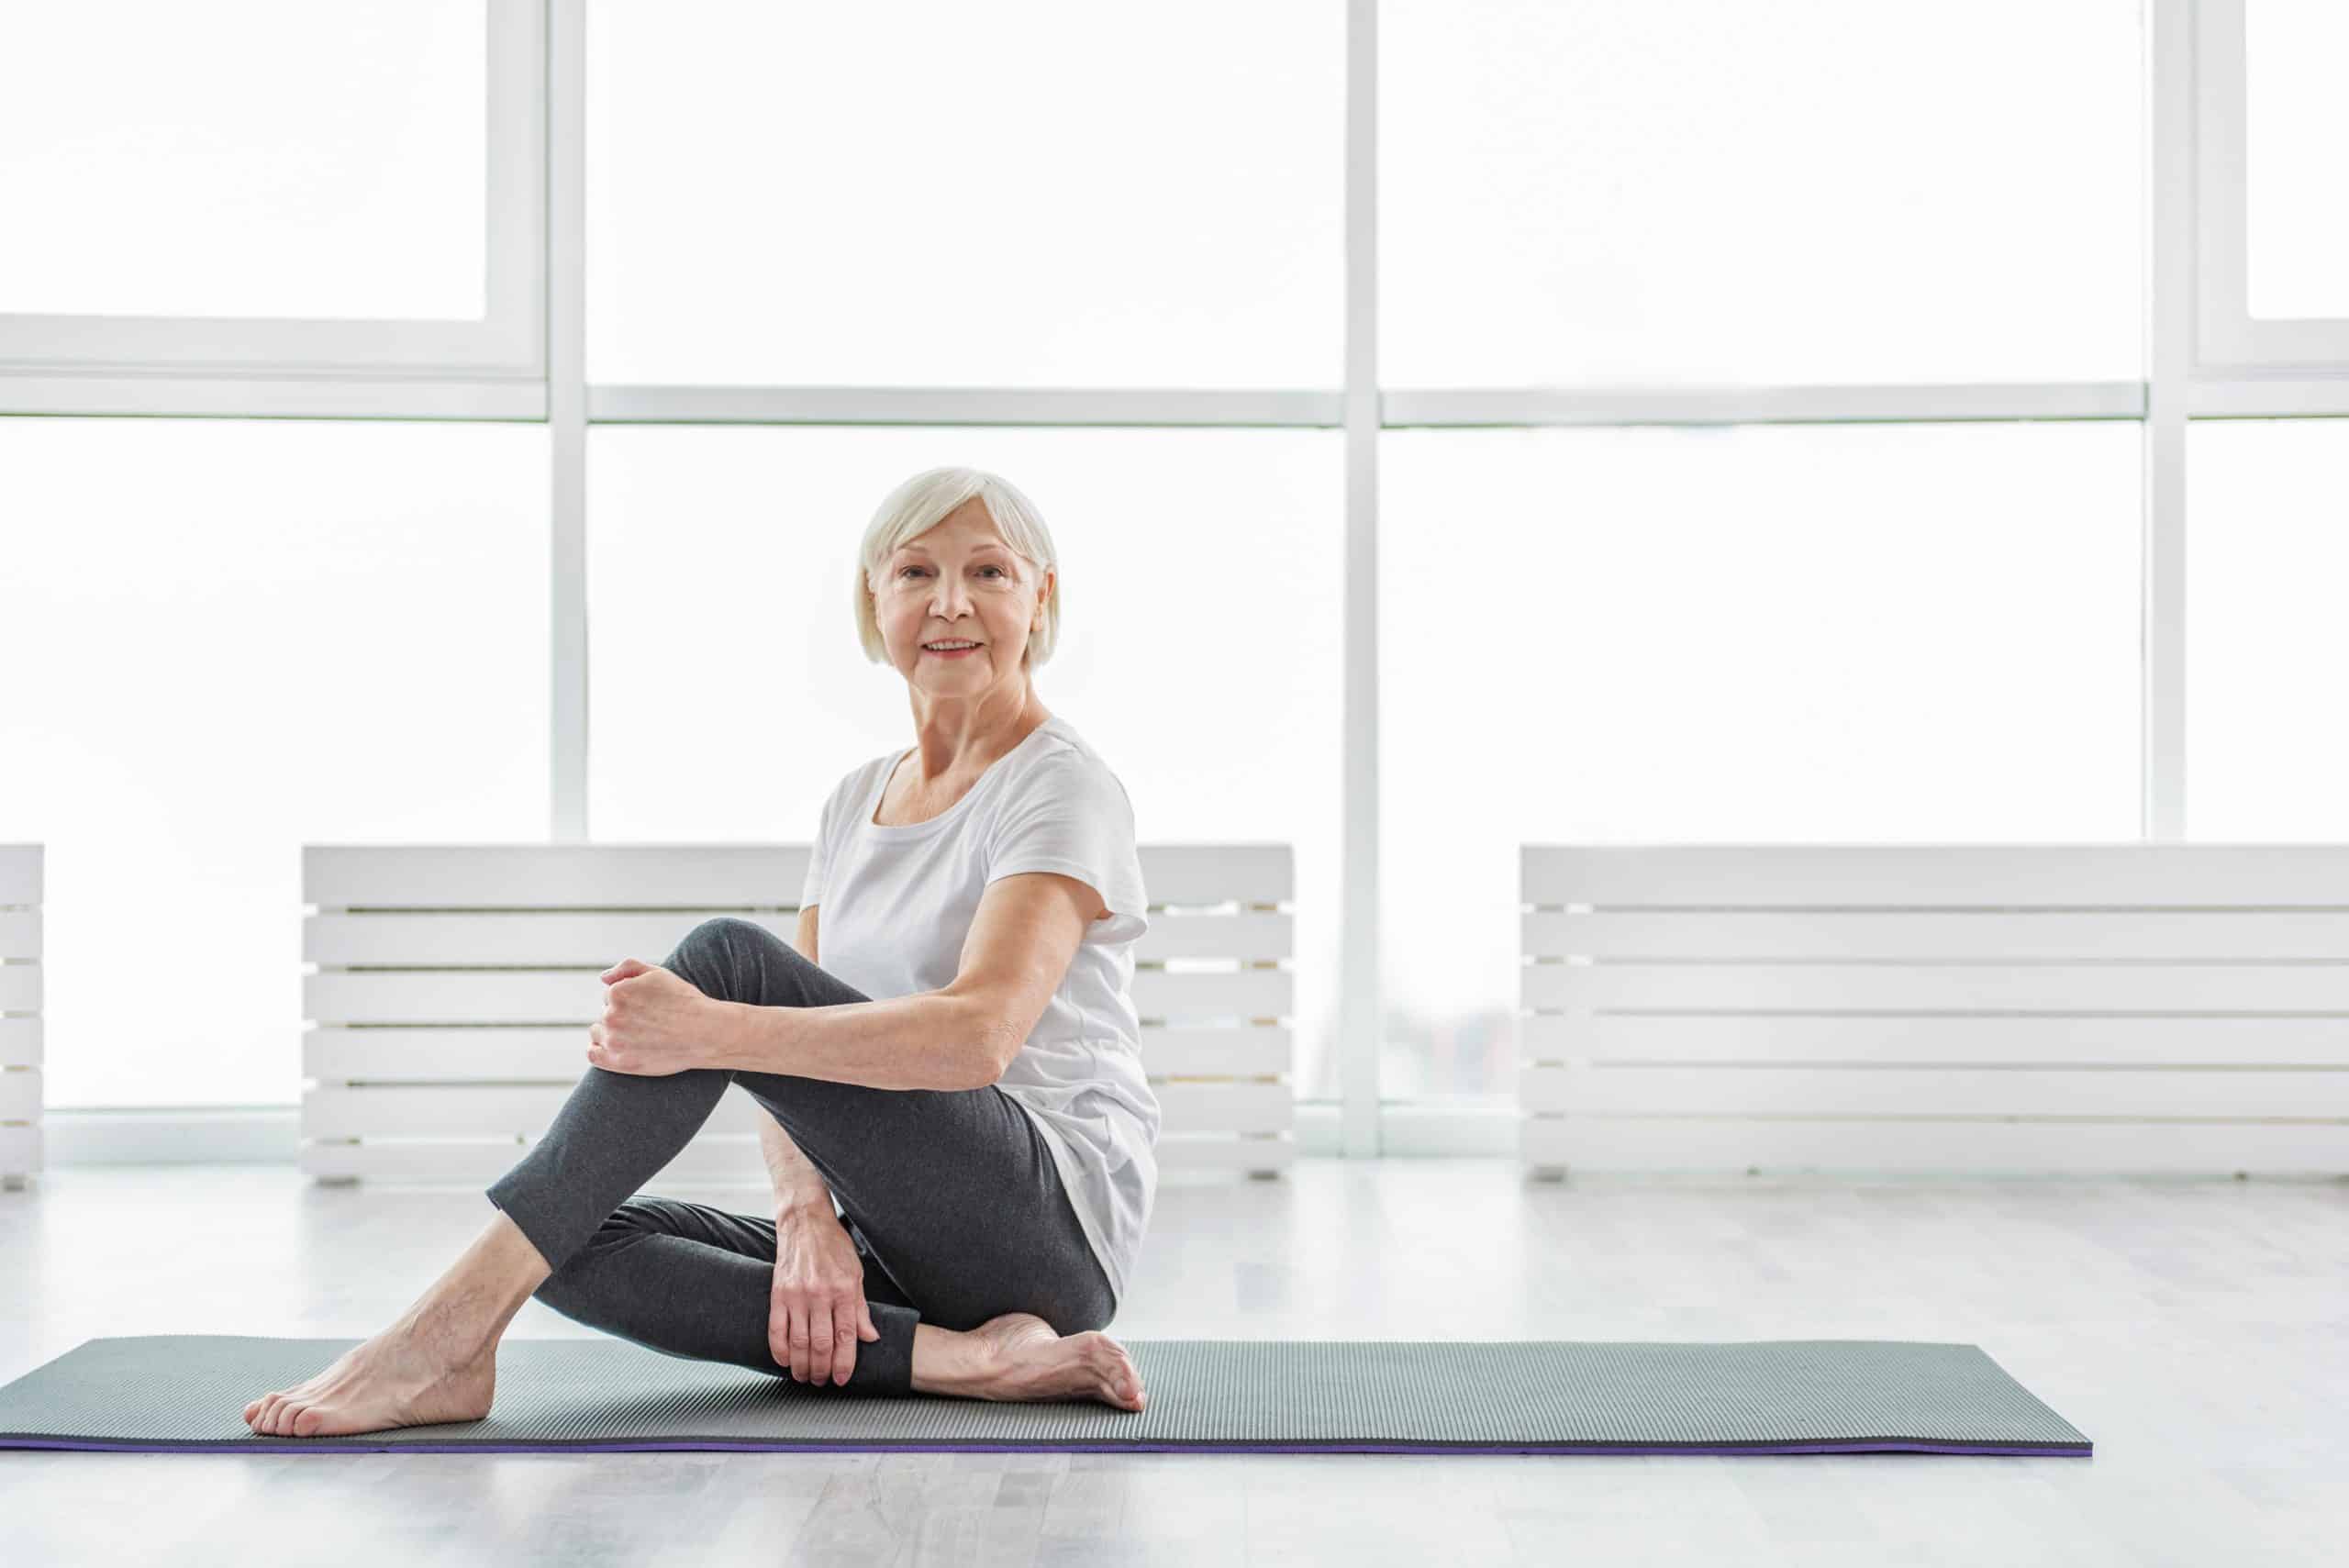 Chair Yoga For Seniors: What Are the Benefits + 4 Great Videos to Get You  Started - WayWiser